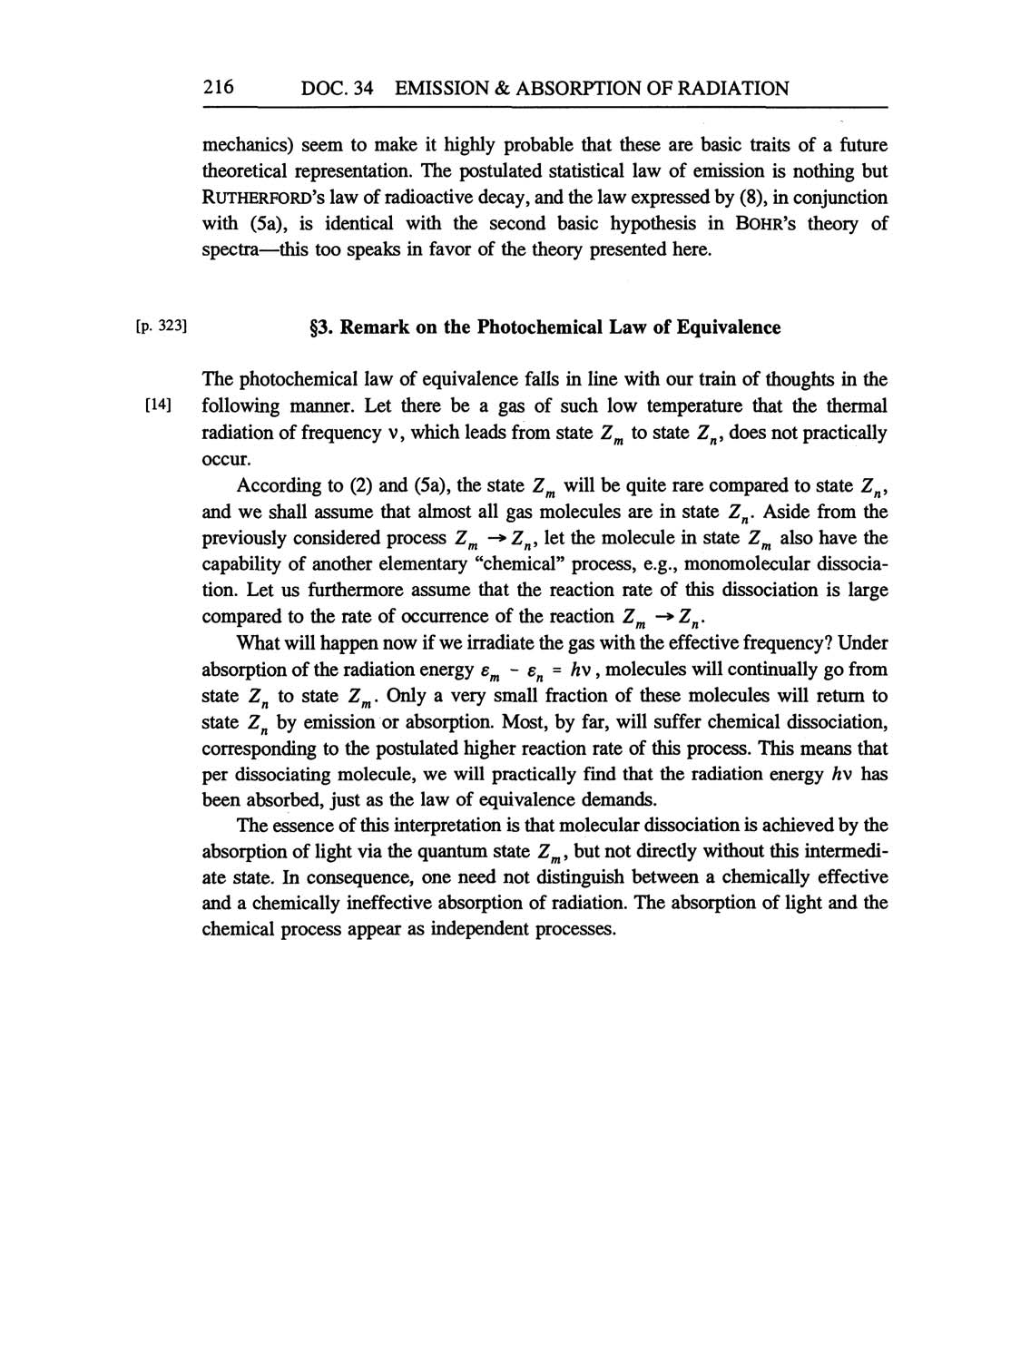 Volume 6: The Berlin Years: Writings, 1914-1917 (English translation supplement) page 216